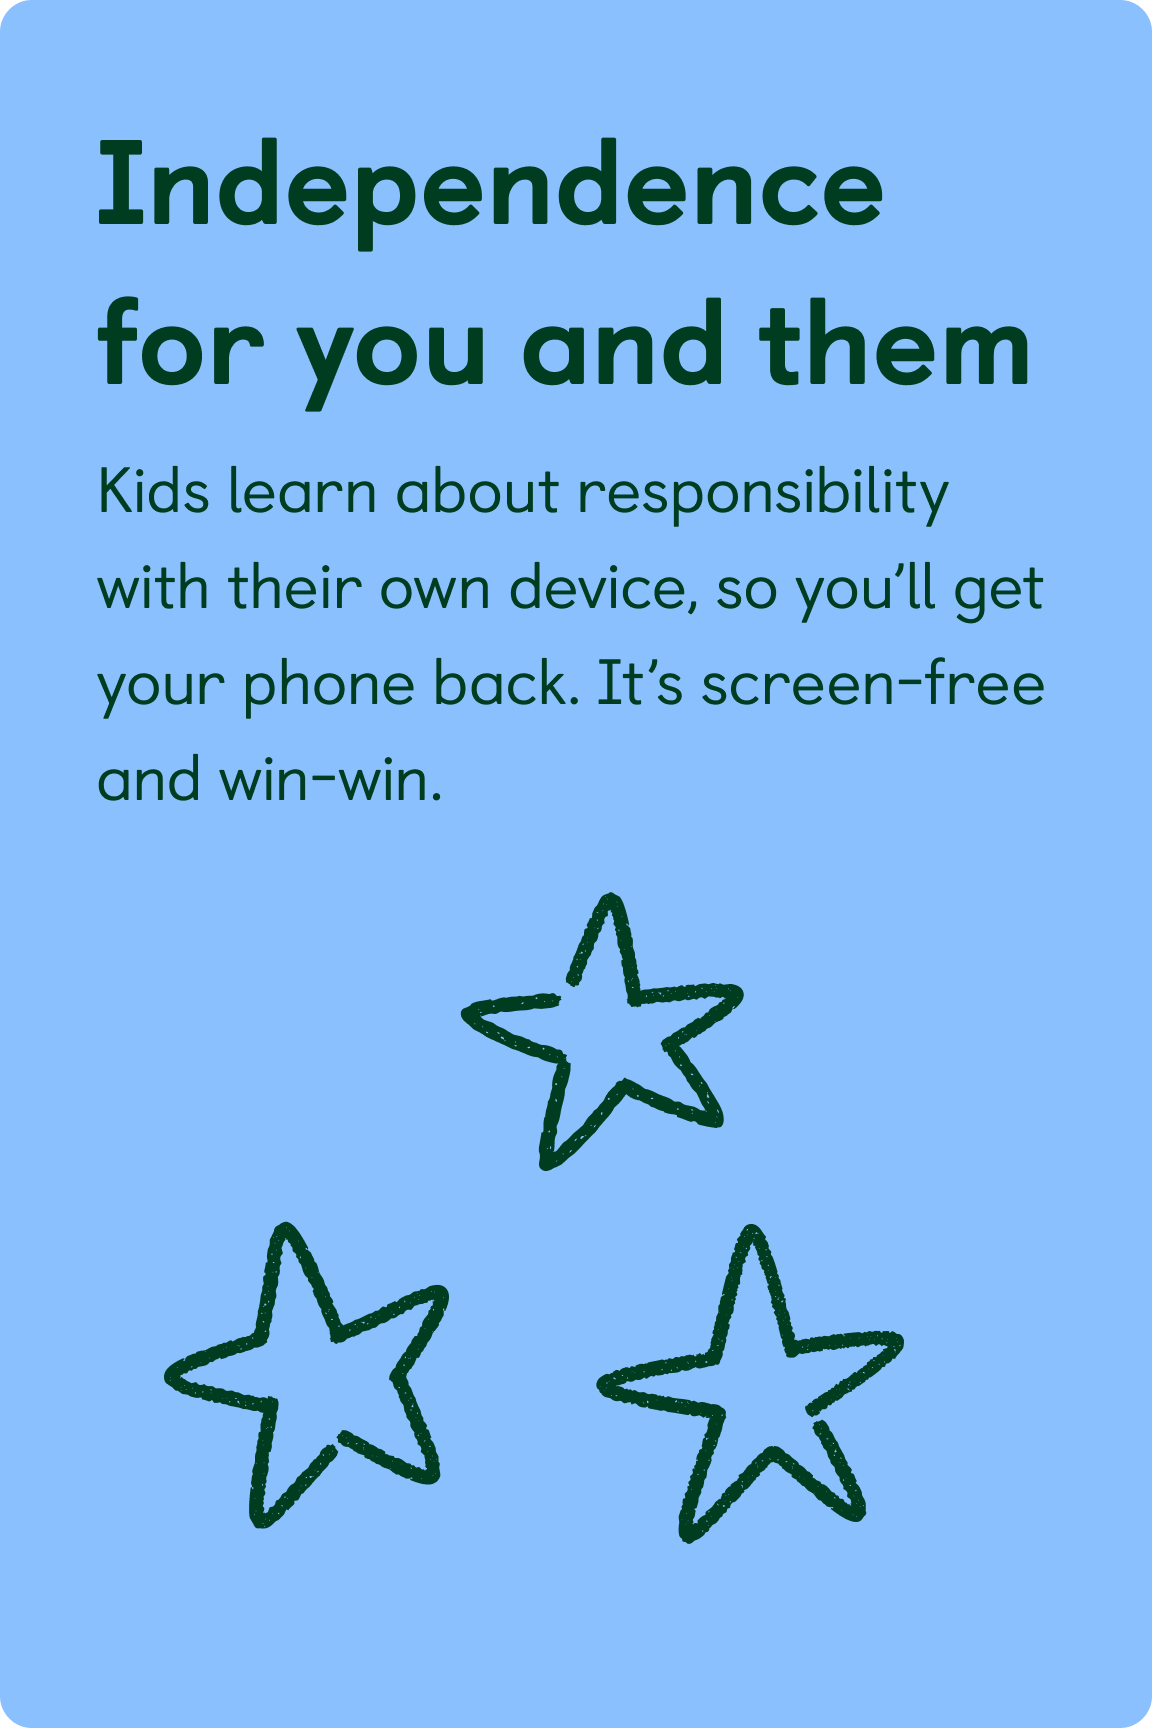 Independence for you and them. Kids learn about responsibility with their own device